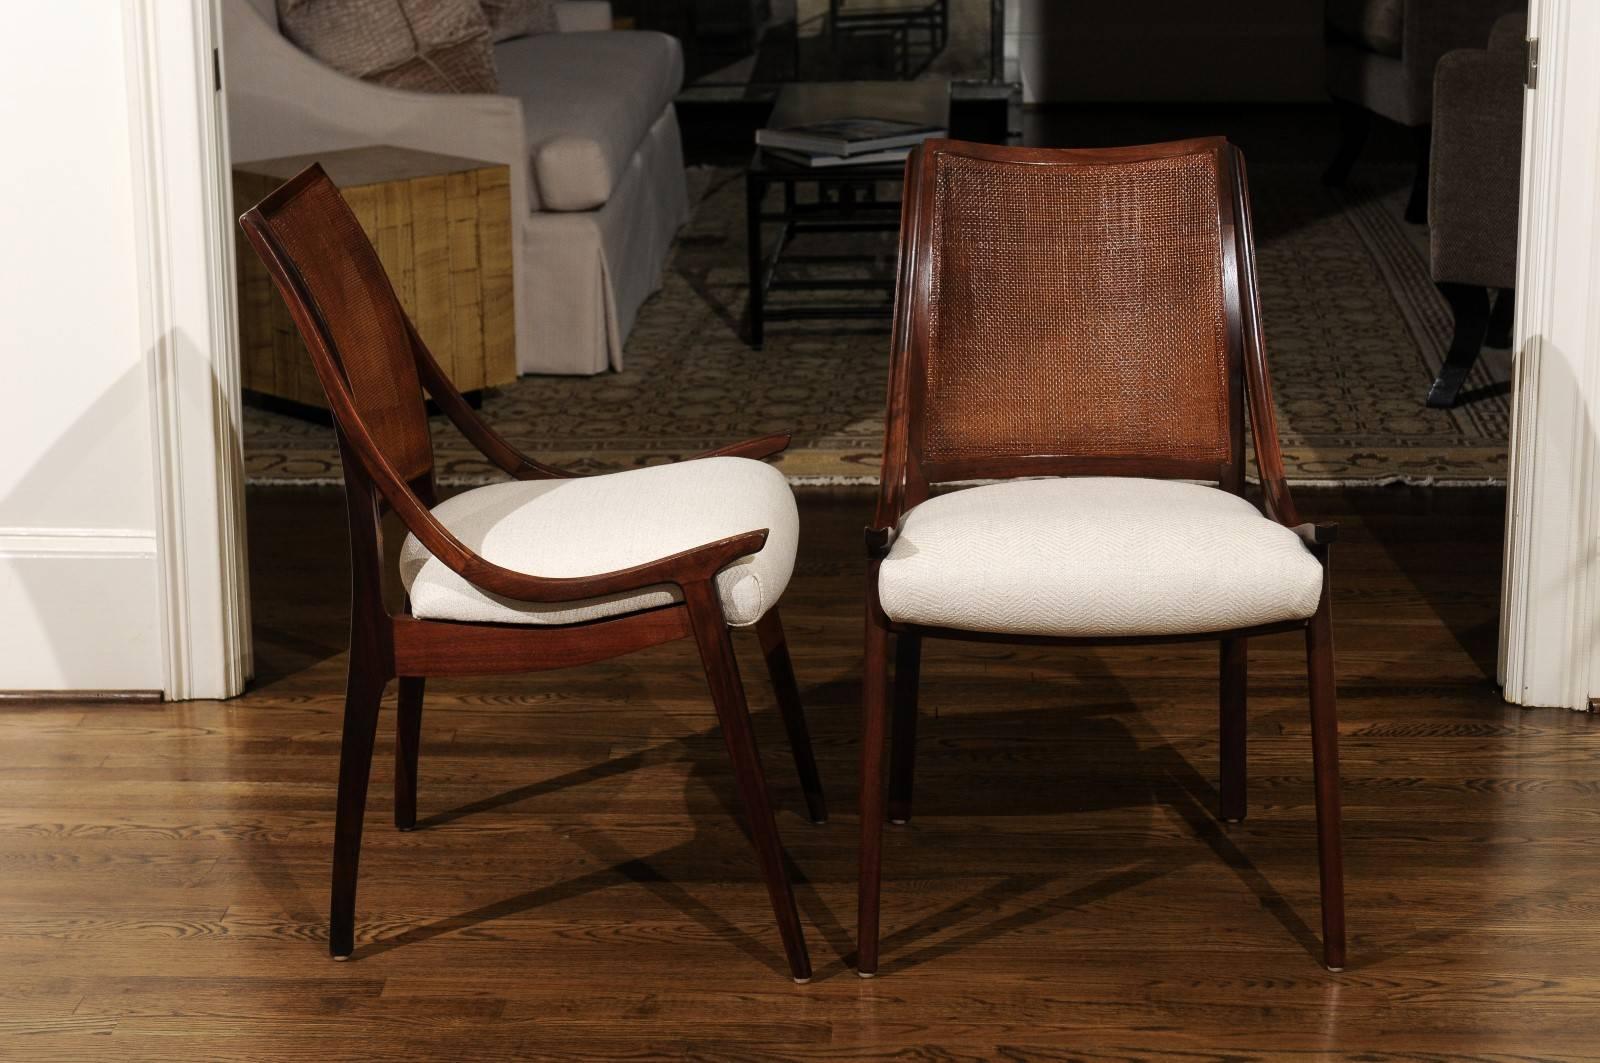 Mid-20th Century Exquisite Set of Eight Cane Chairs by John Kapel for Glenn of California